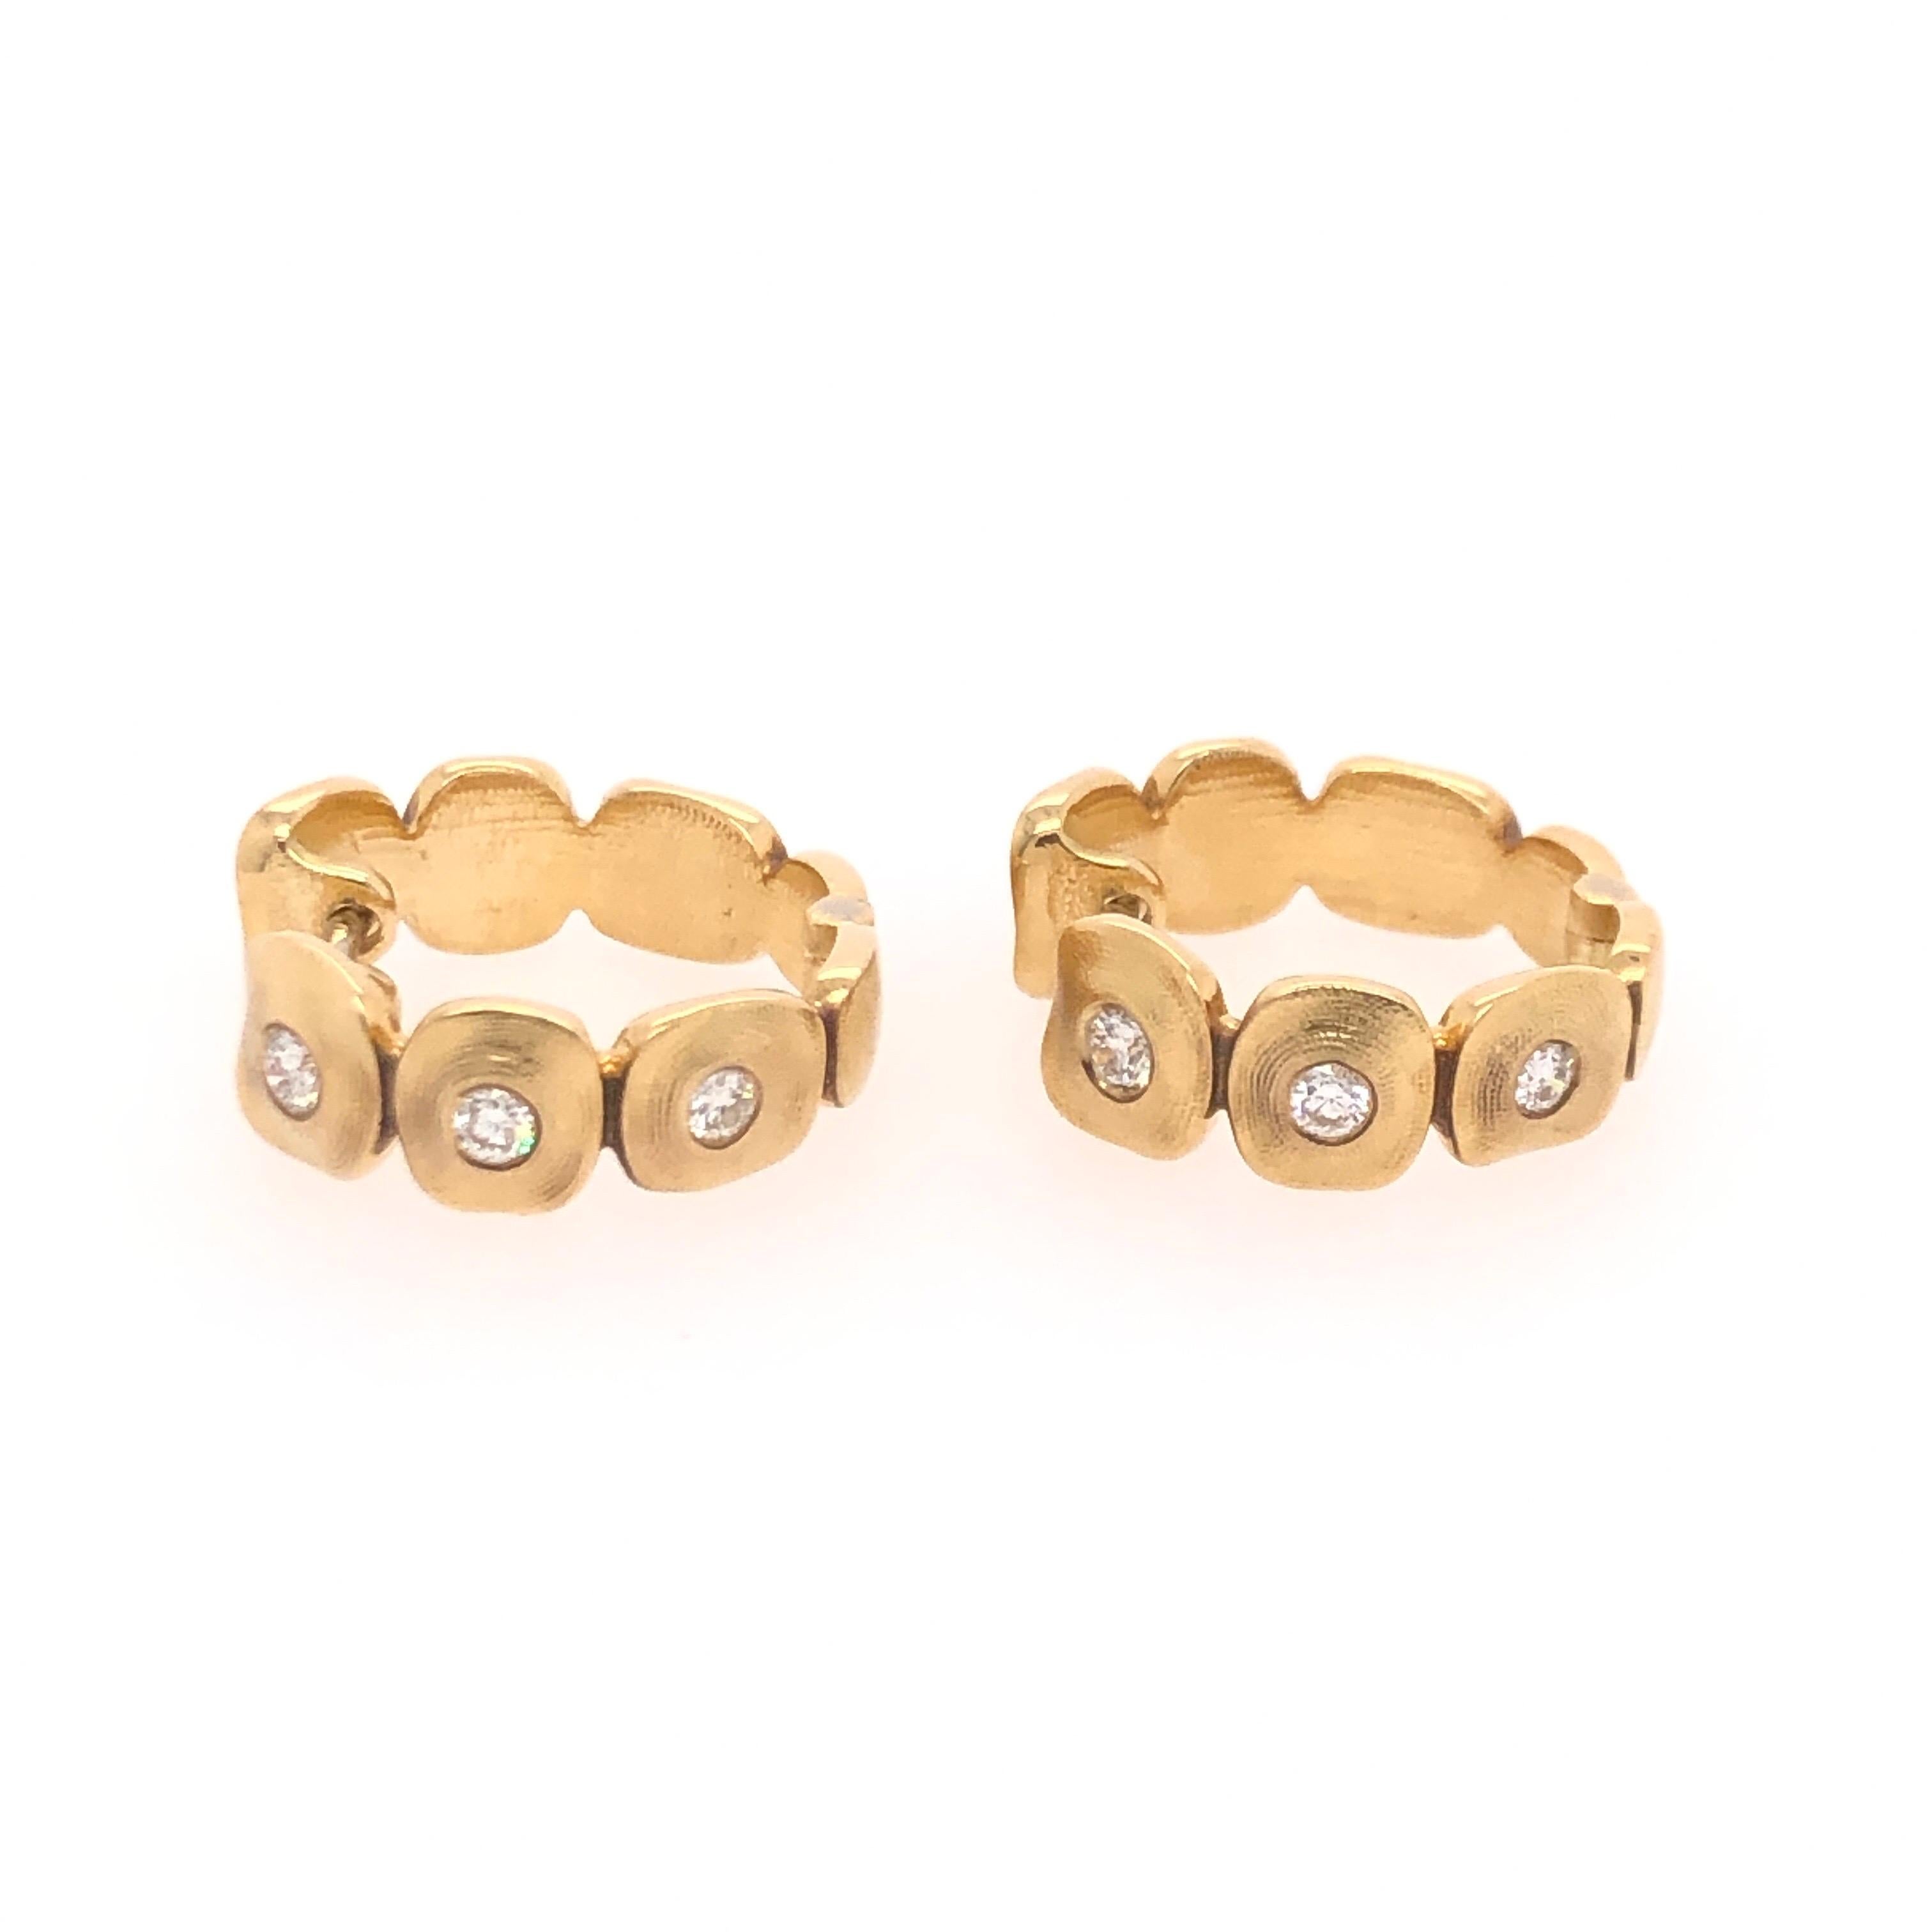 Alex Sepkus 18K and Diamond Dancing Squares Earrings. These huggie earrings have 6 diamonds with a total weight of 0.19 CTS. Earrings are flexible and can be worn with diamonds on outside or inside.